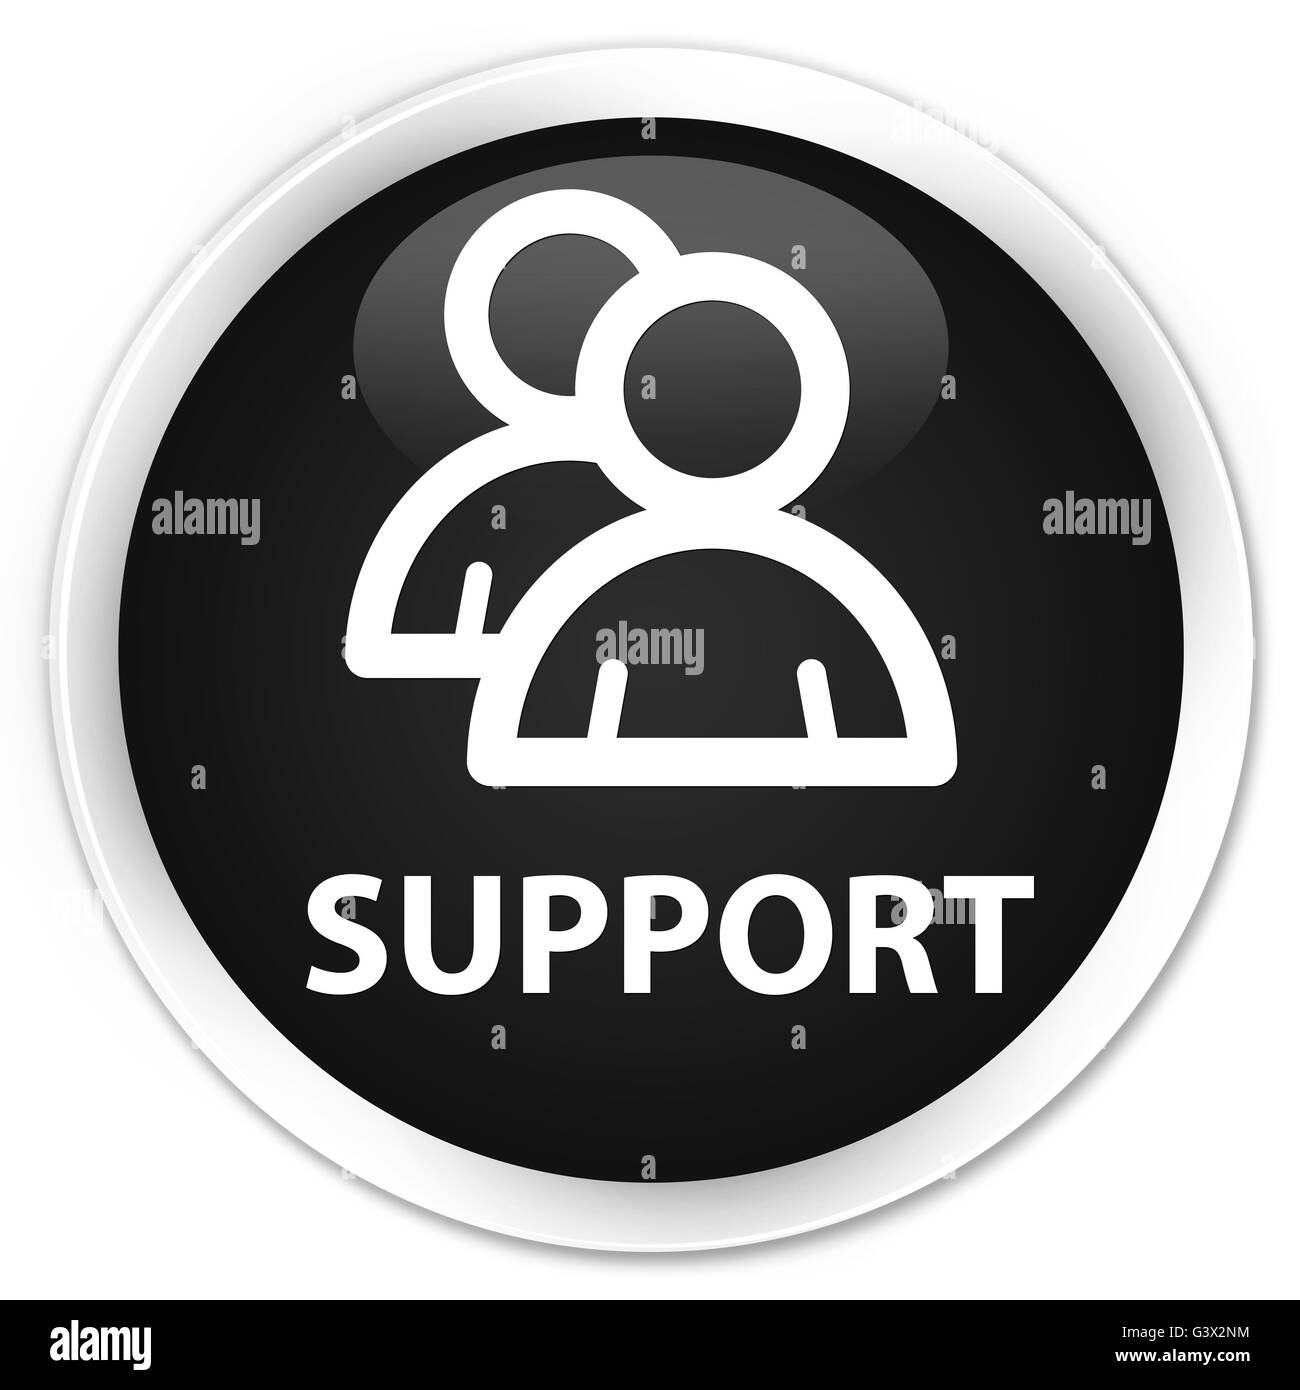 Support (group icon) isolated on premium black round button abstract illustration Stock Photo